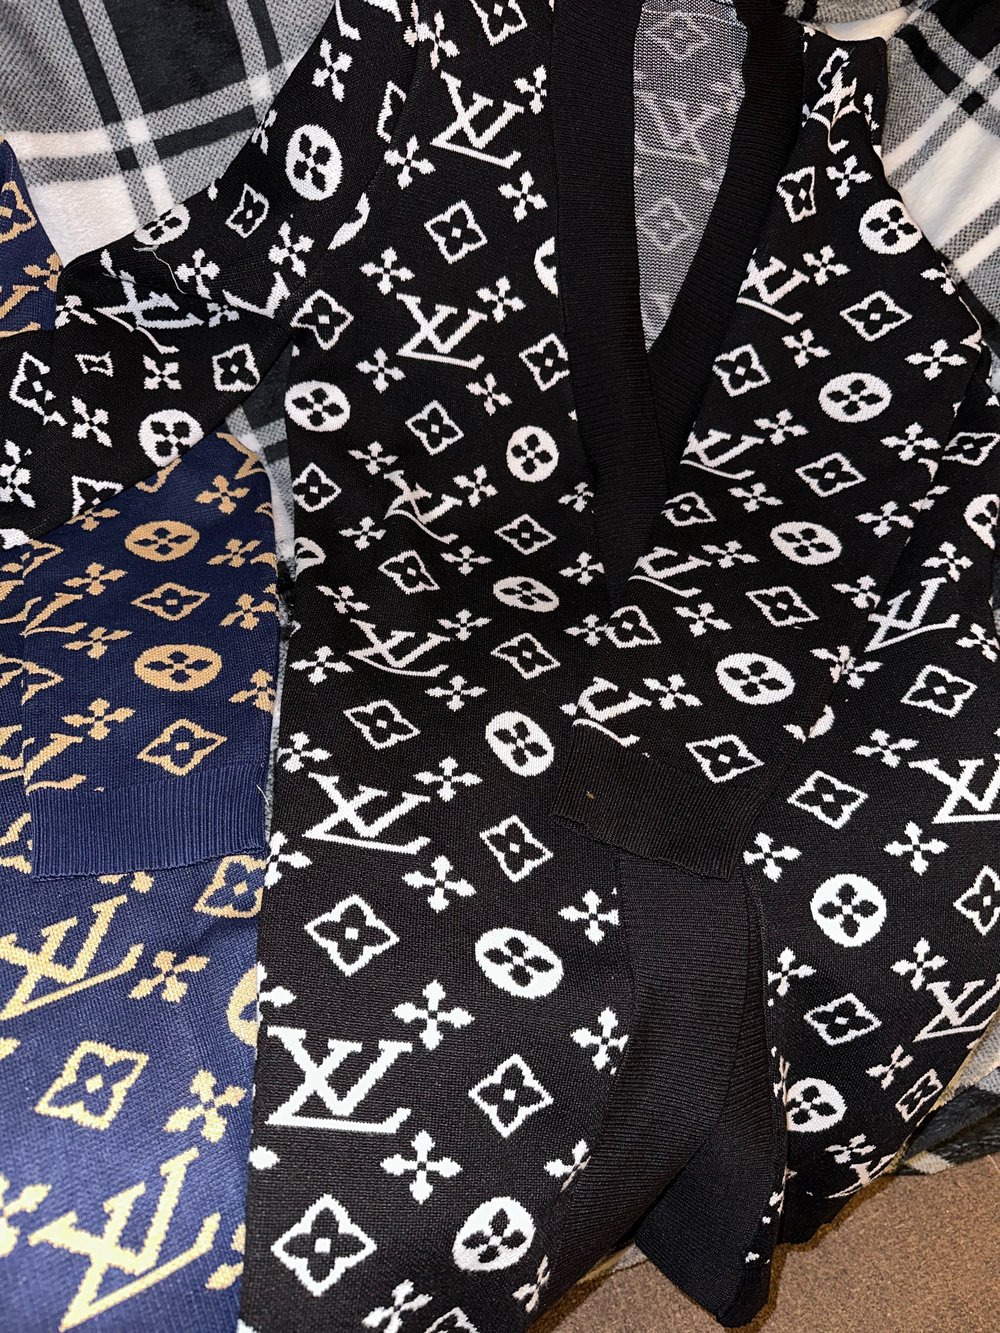 Over Sized LV Sweater 